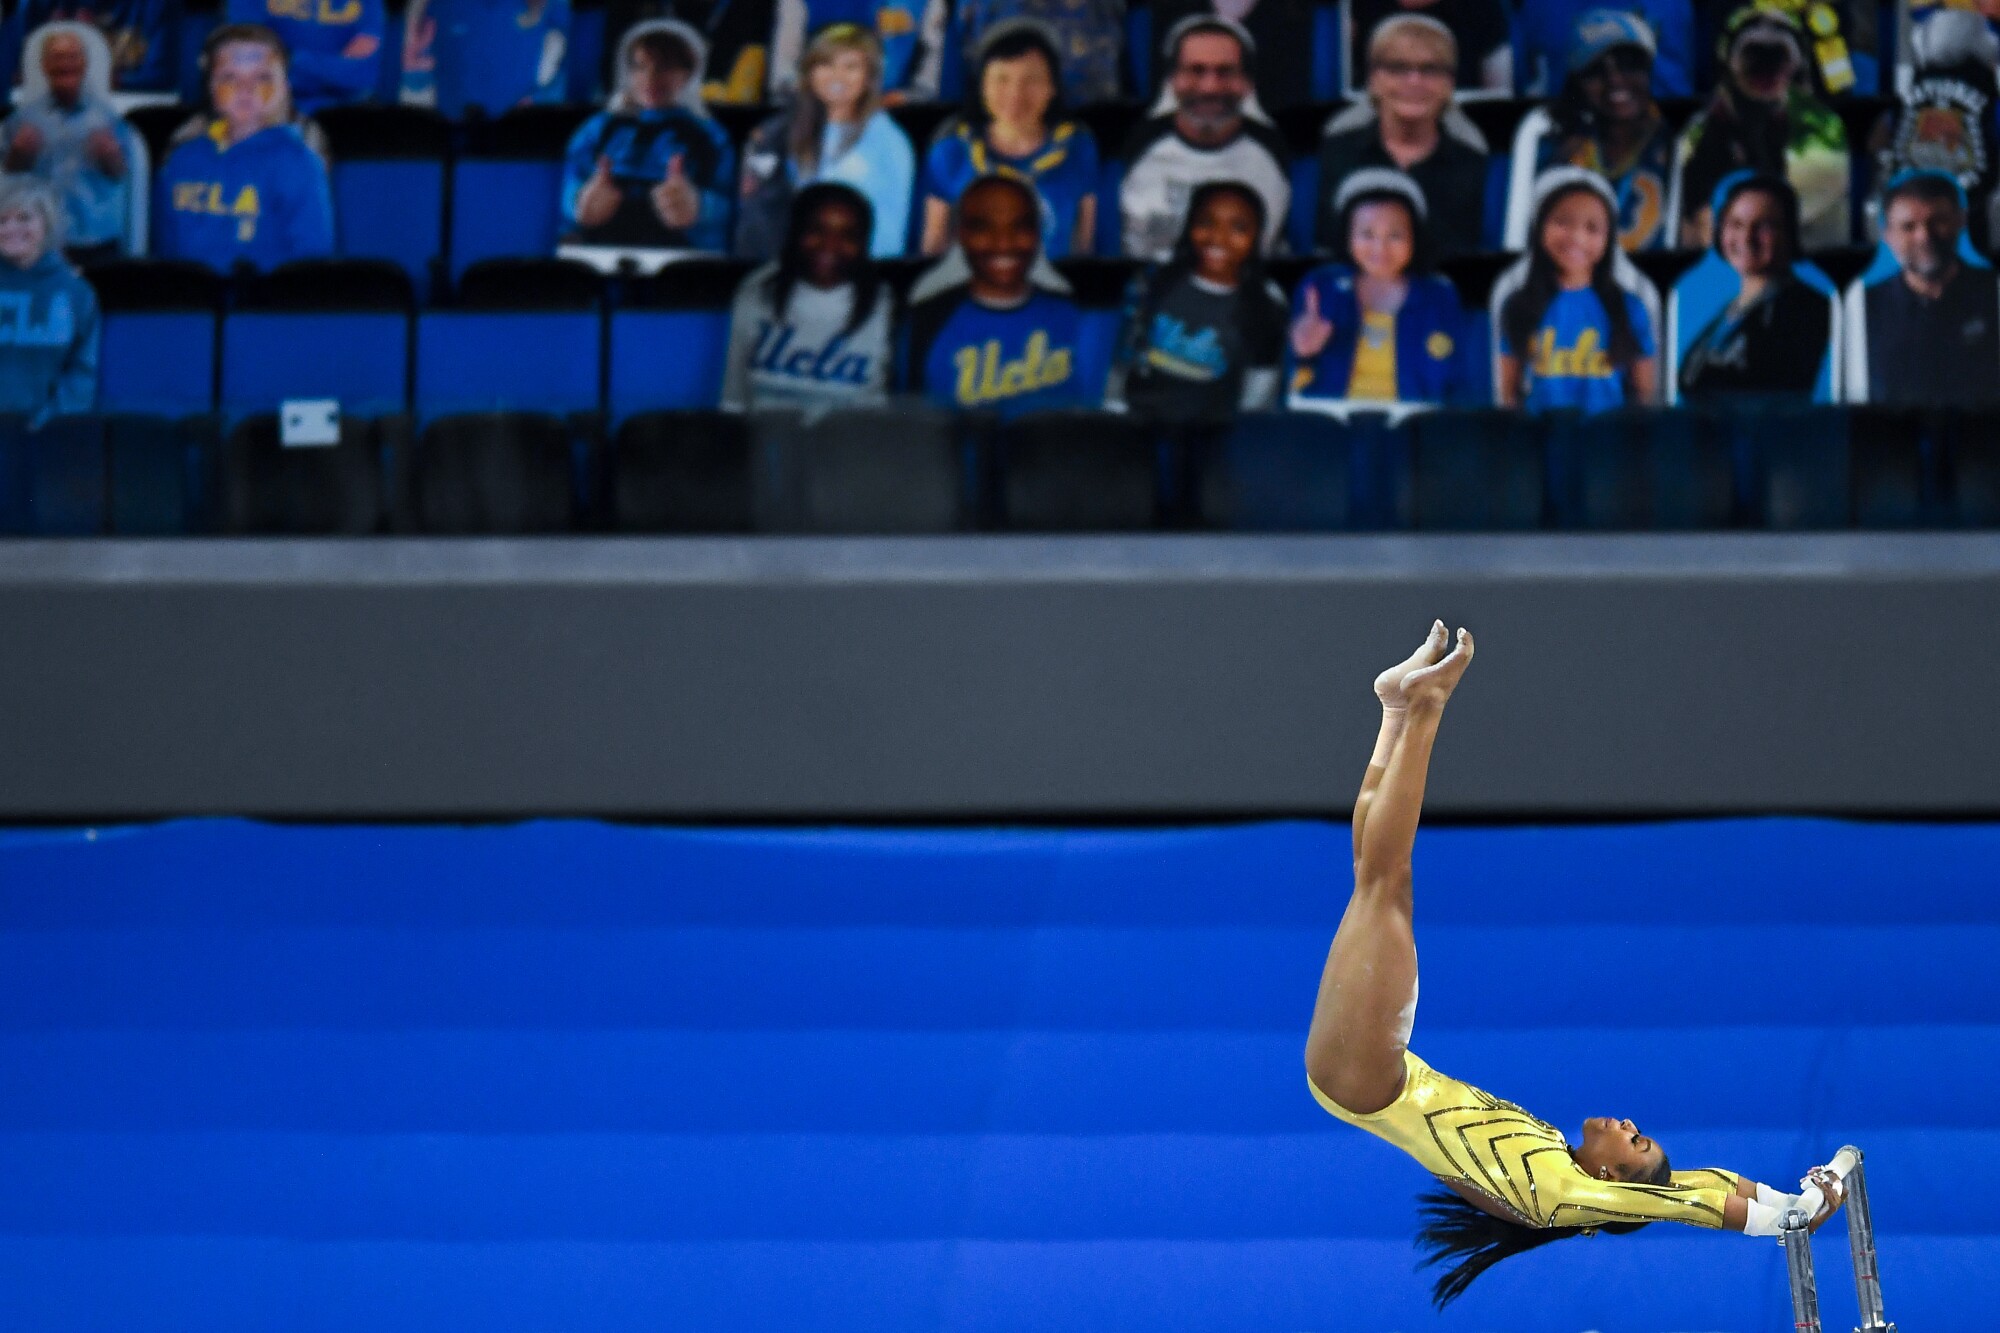 A gymnast in yellow competes on the uneven bars.